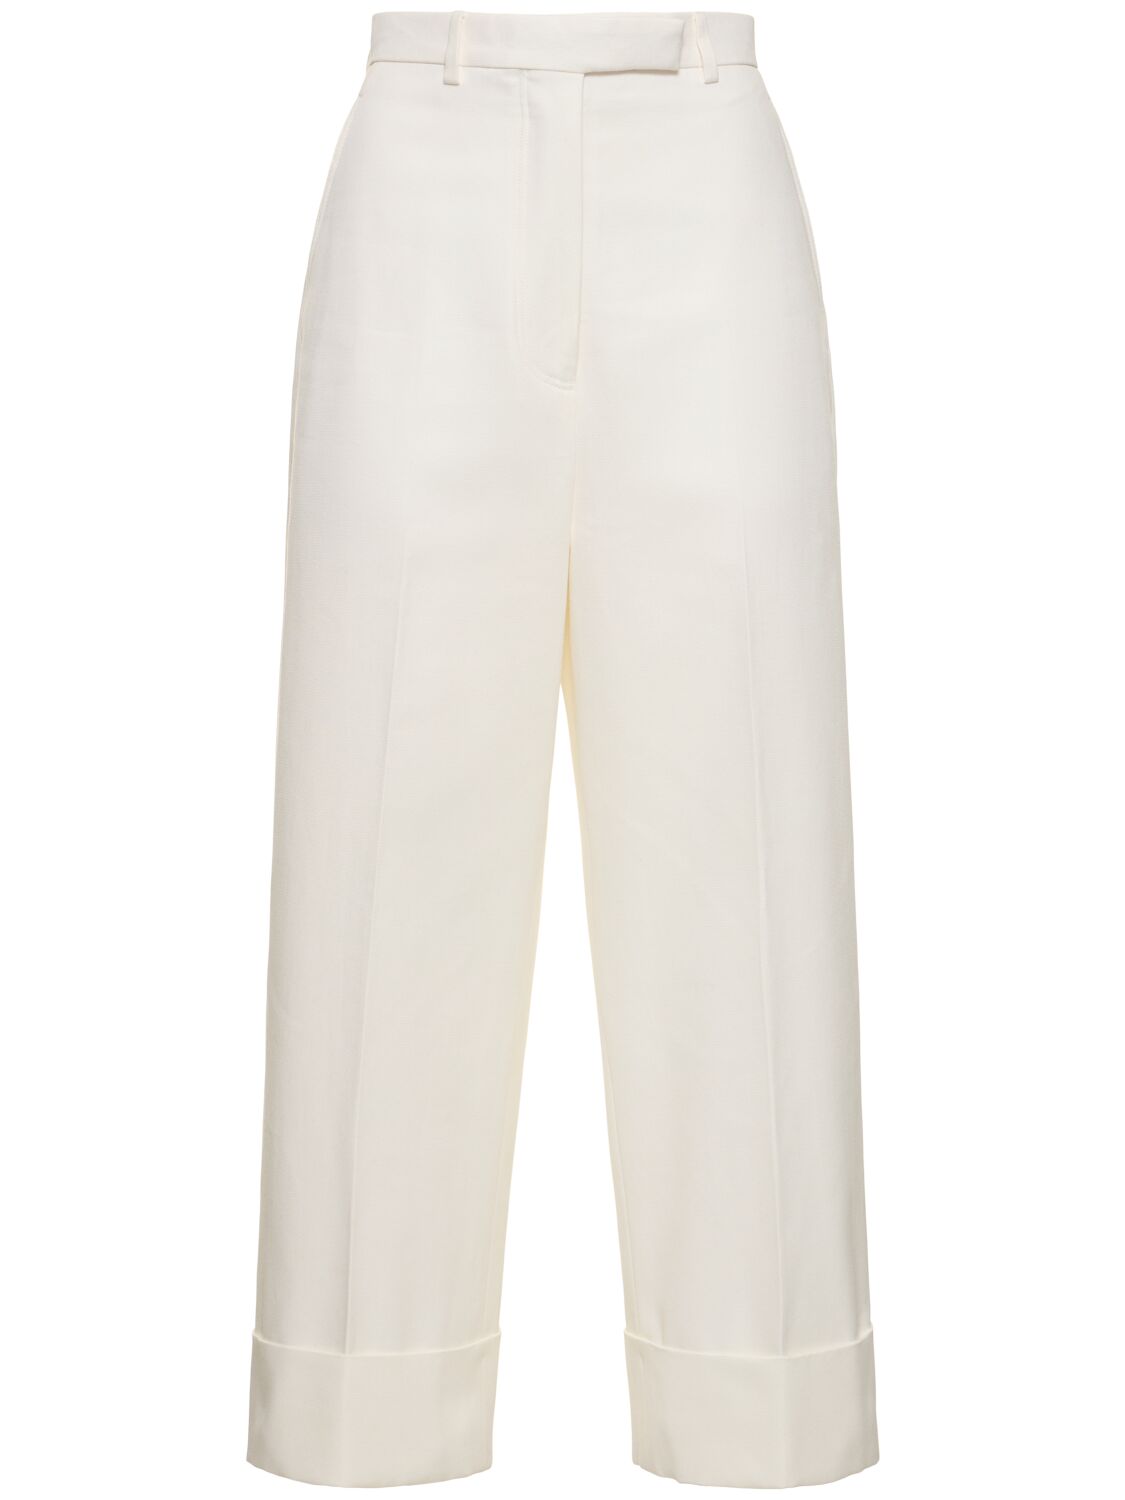 Image of Straight Cotton High Waist Cropped Pants